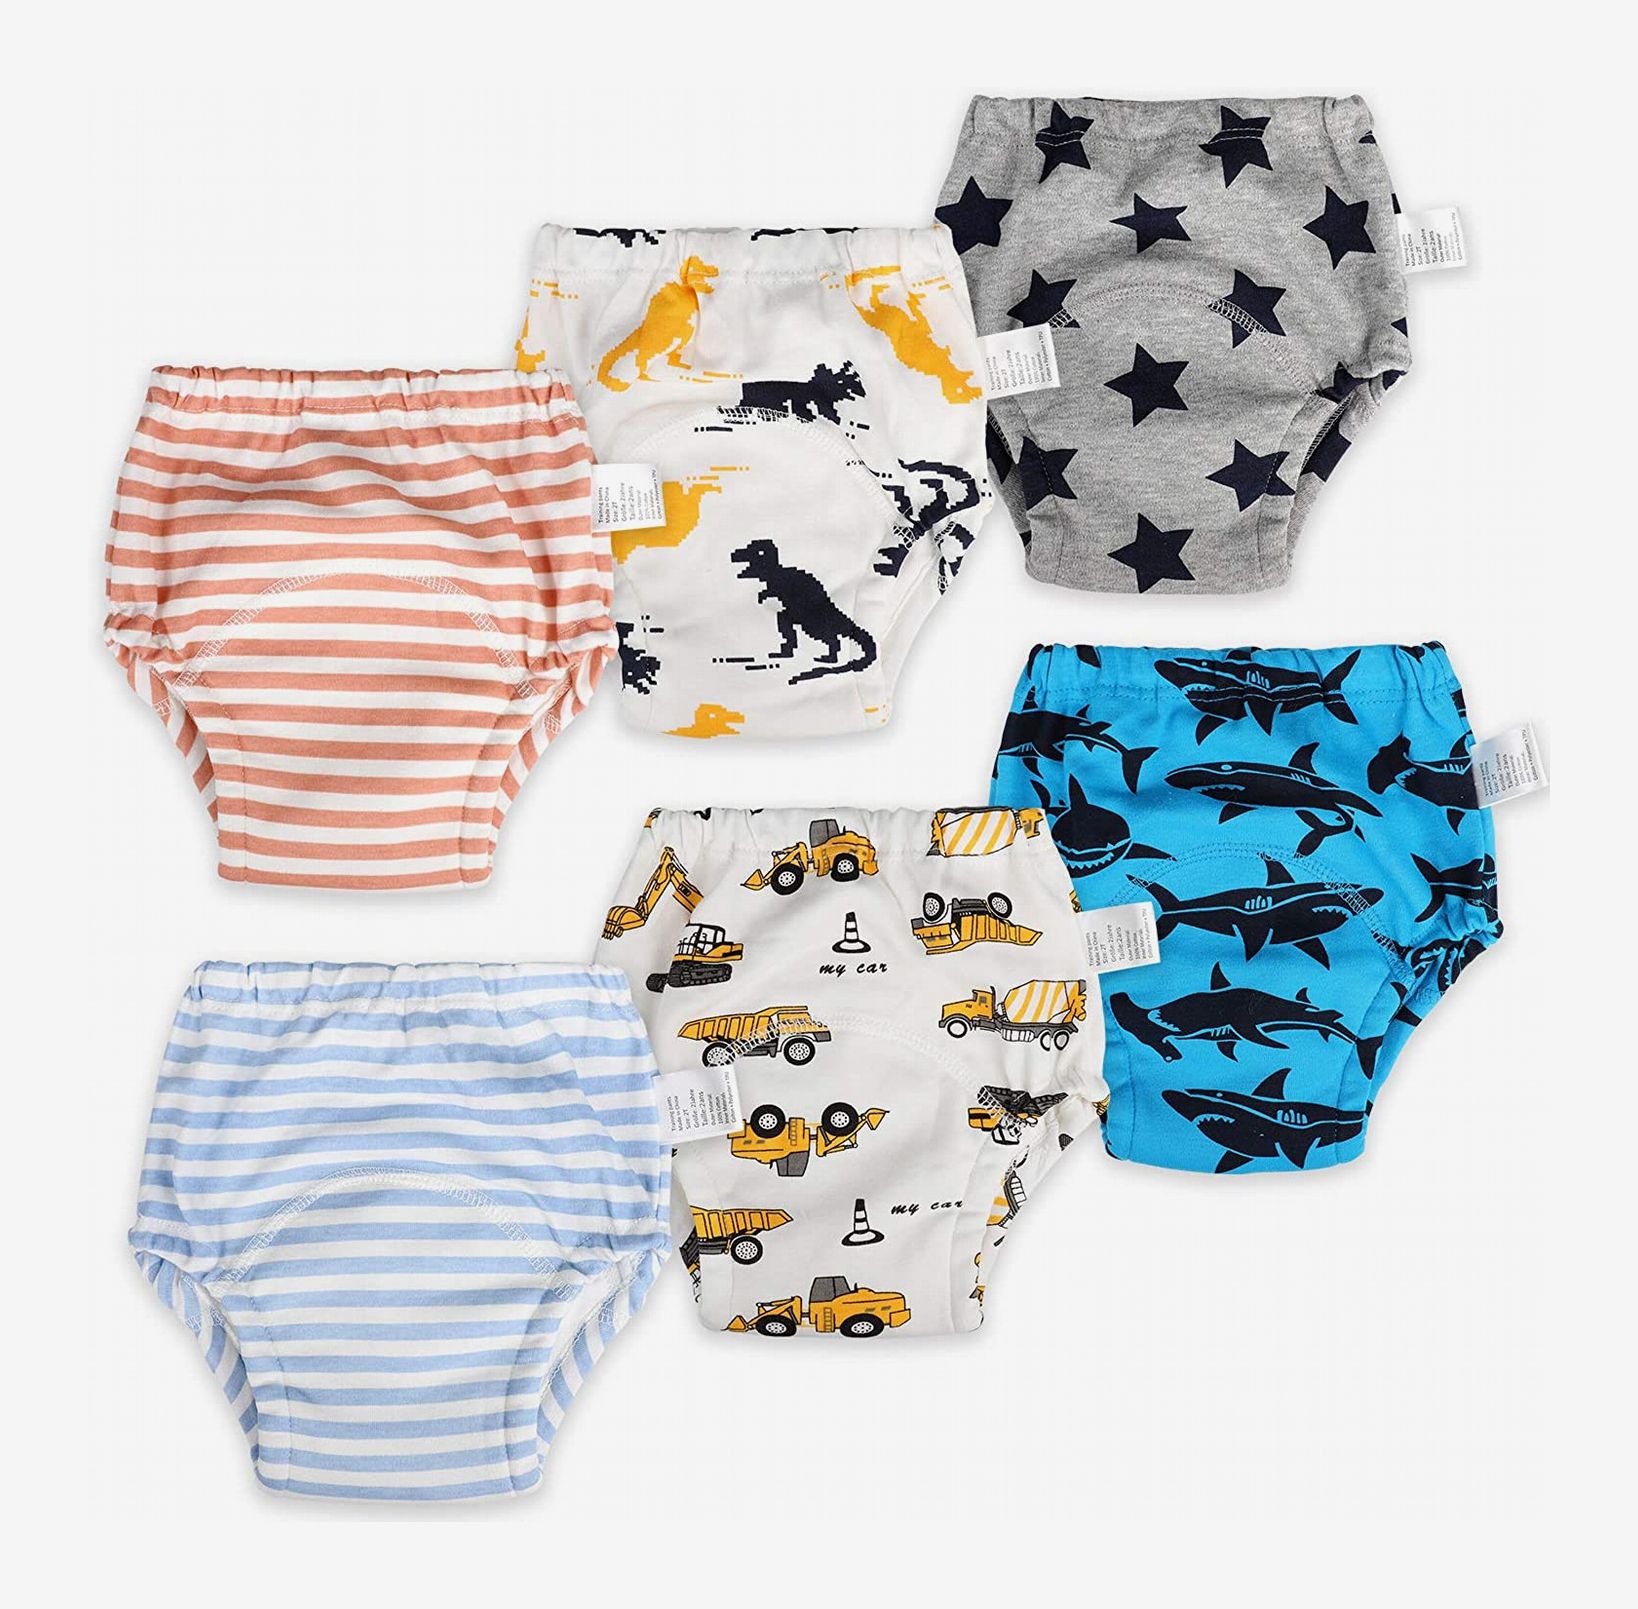 MooMoo Baby 8 Packs Potty Training Underwear Cotton Absorbent Training Pants for Toddler Baby 2-6T 